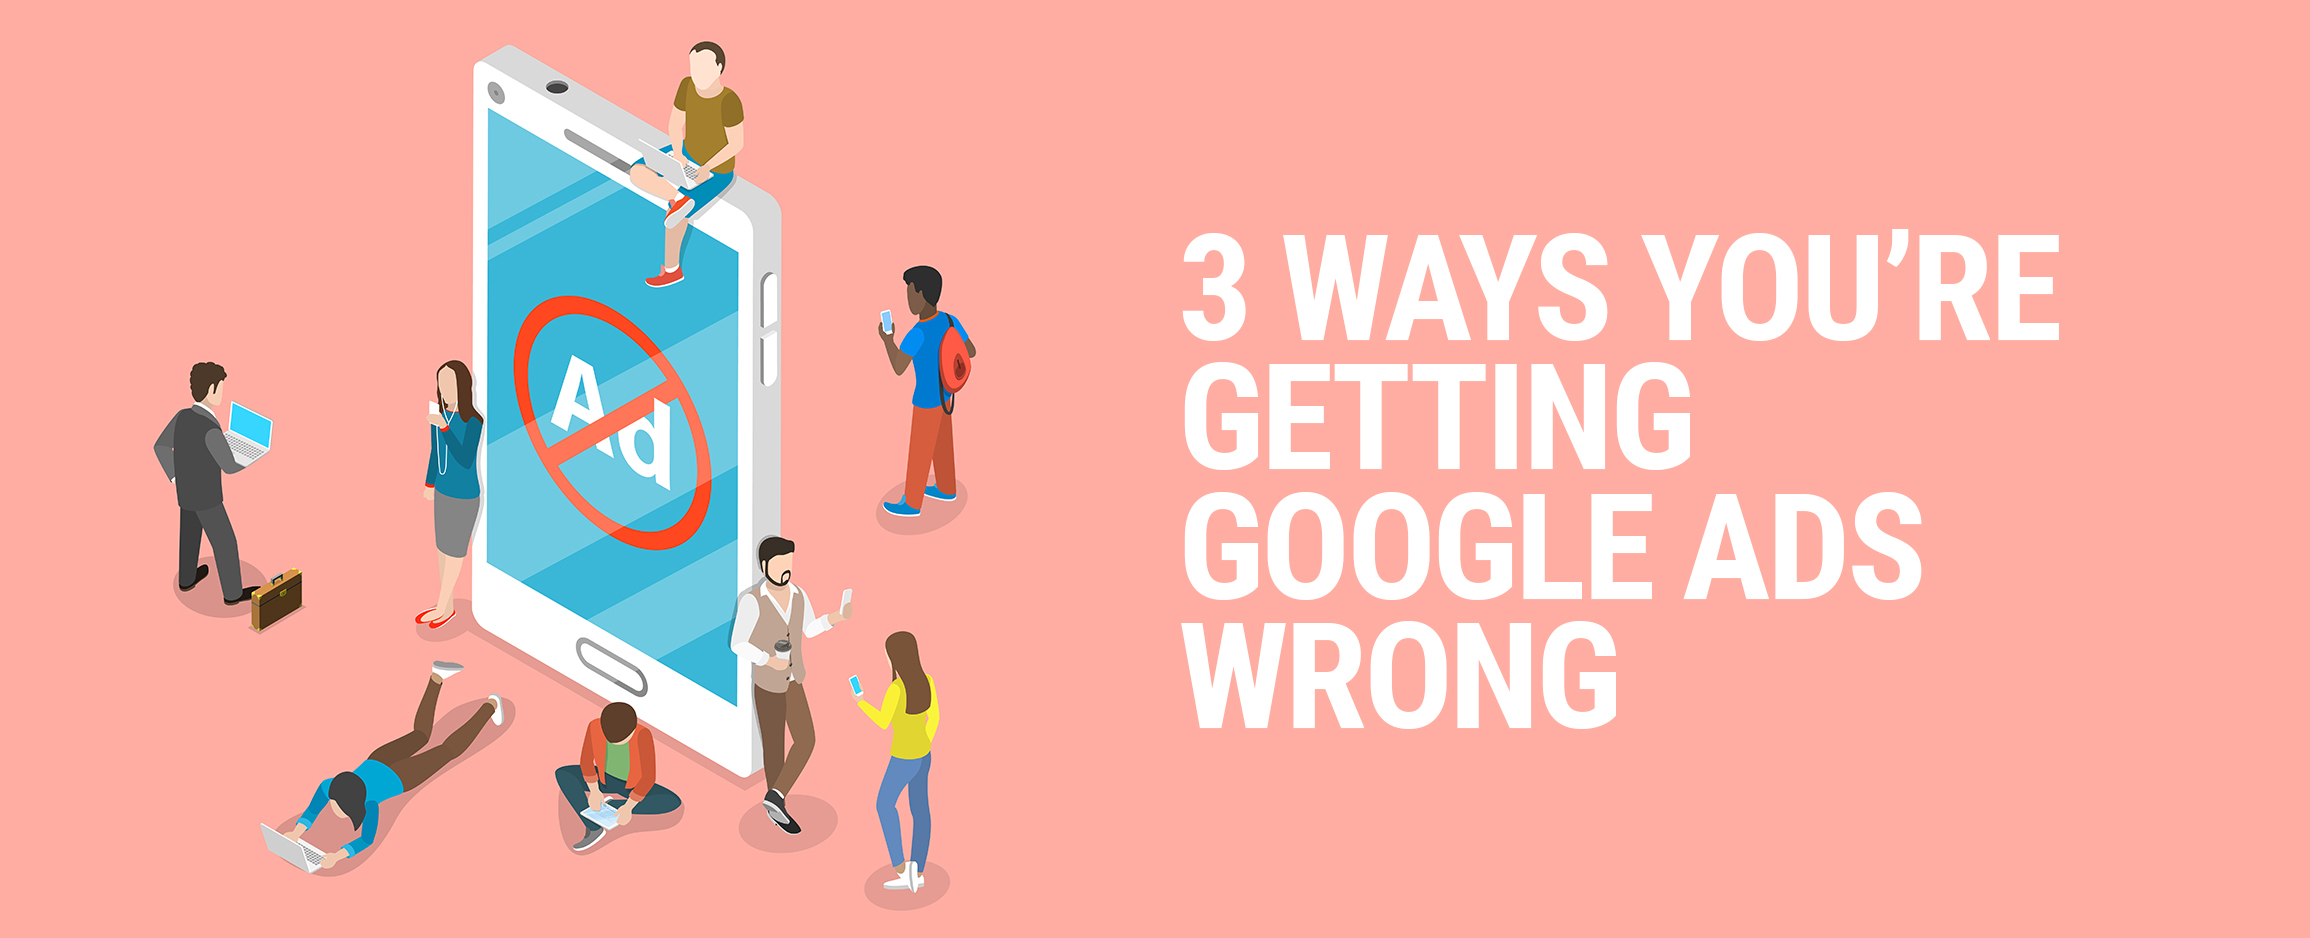 3 Ways You’re Getting Google Ads Wrong